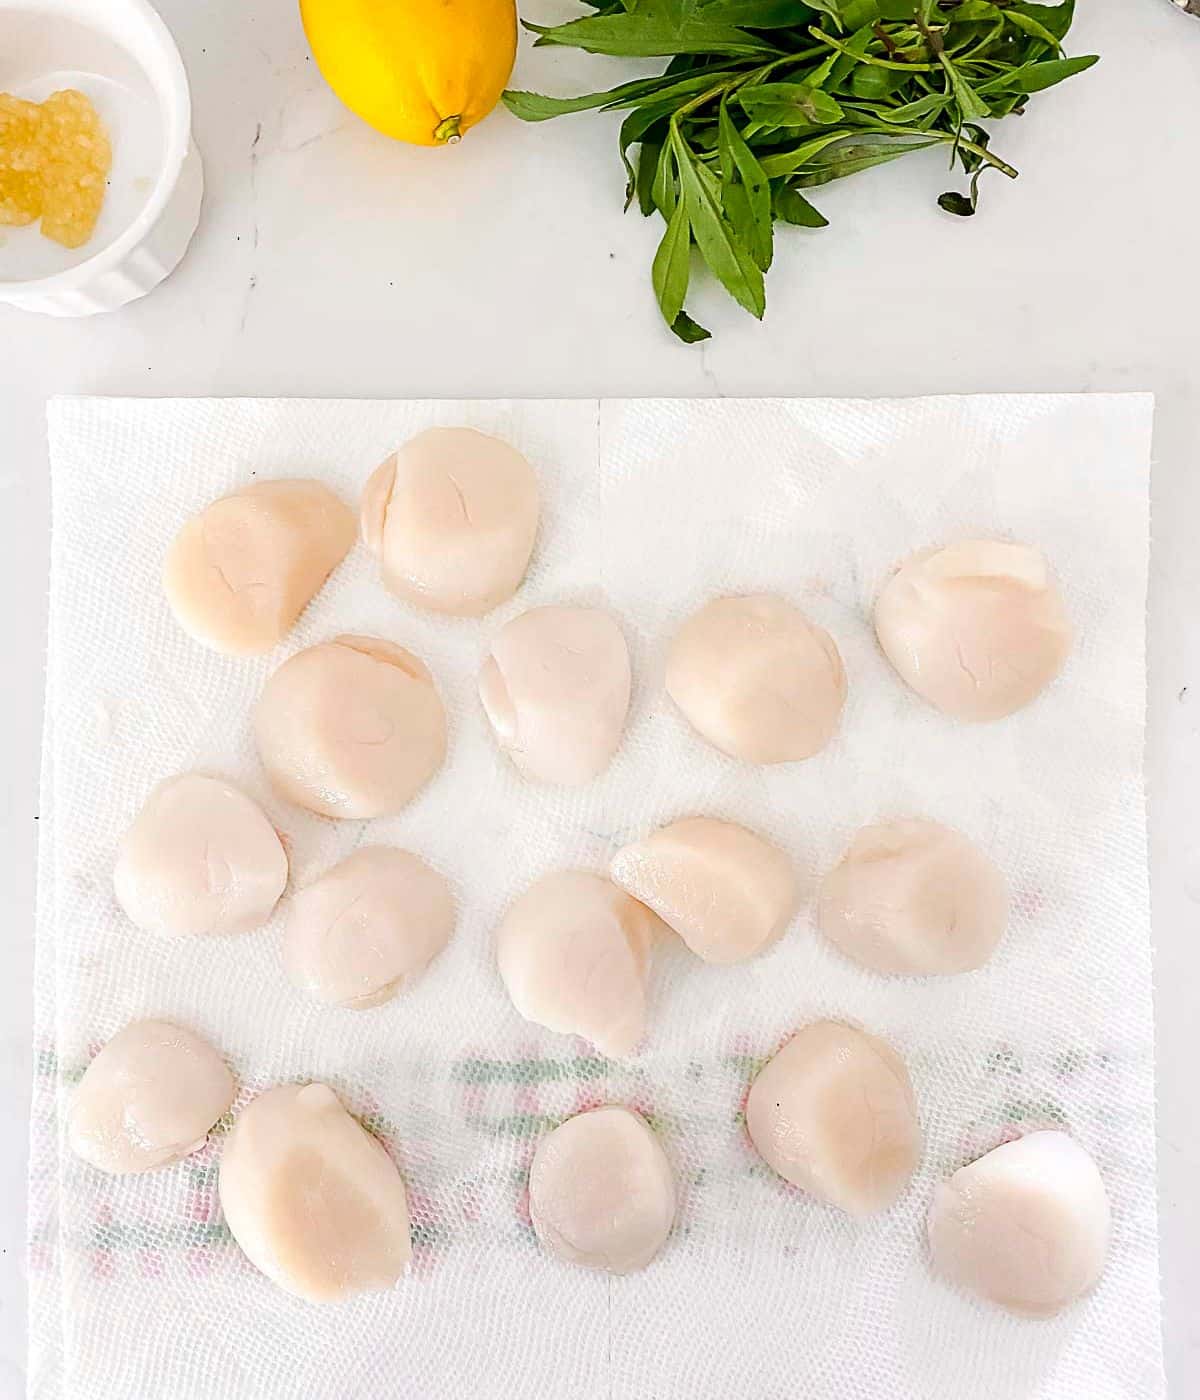 Drying scallops on a paper towel before air frying.